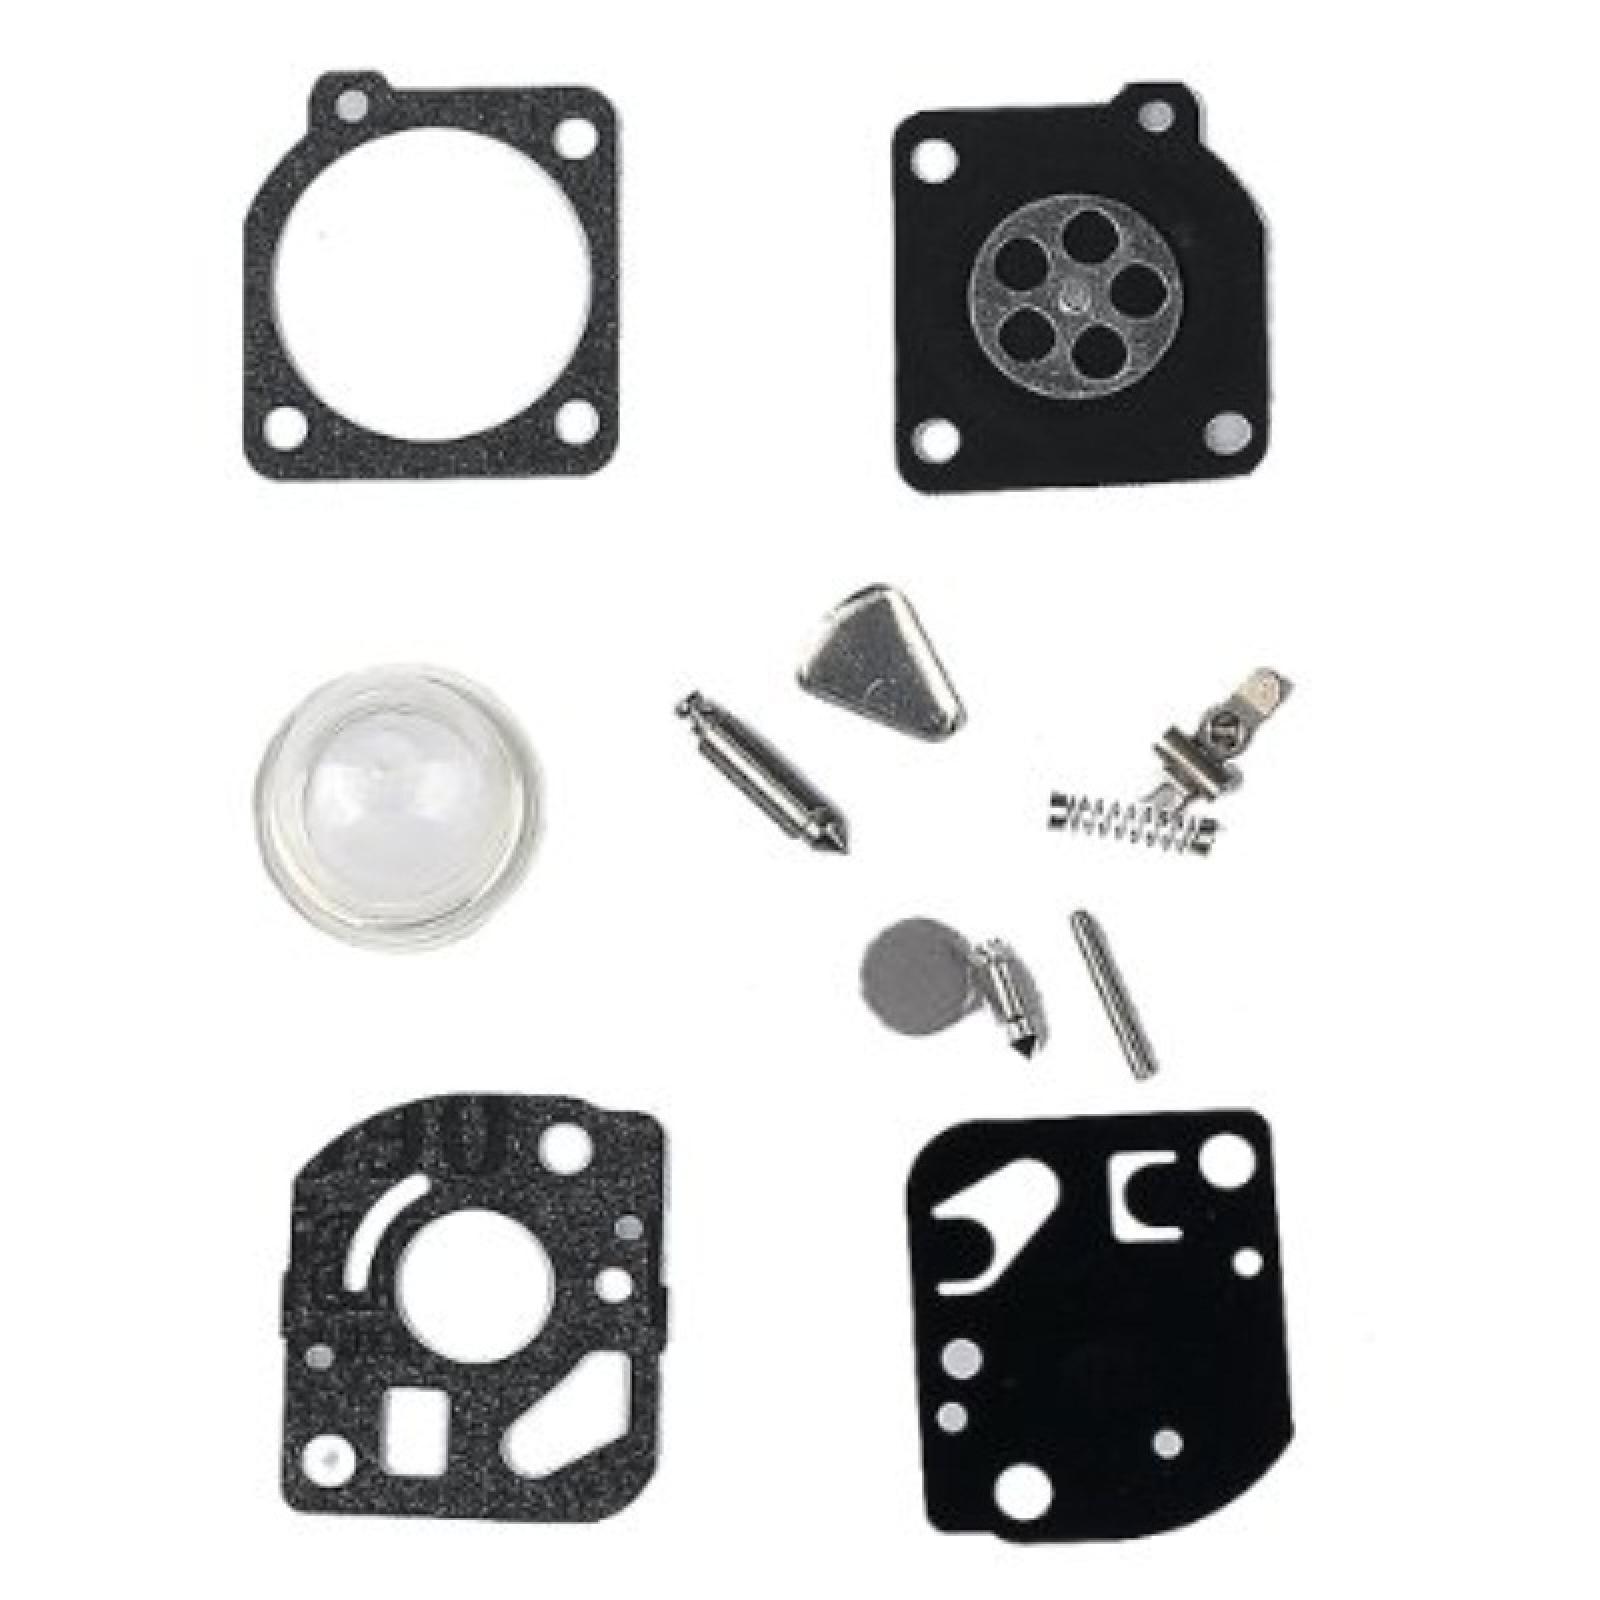 GASKET KIT part# 575403101 by Husqvarna - Click Image to Close